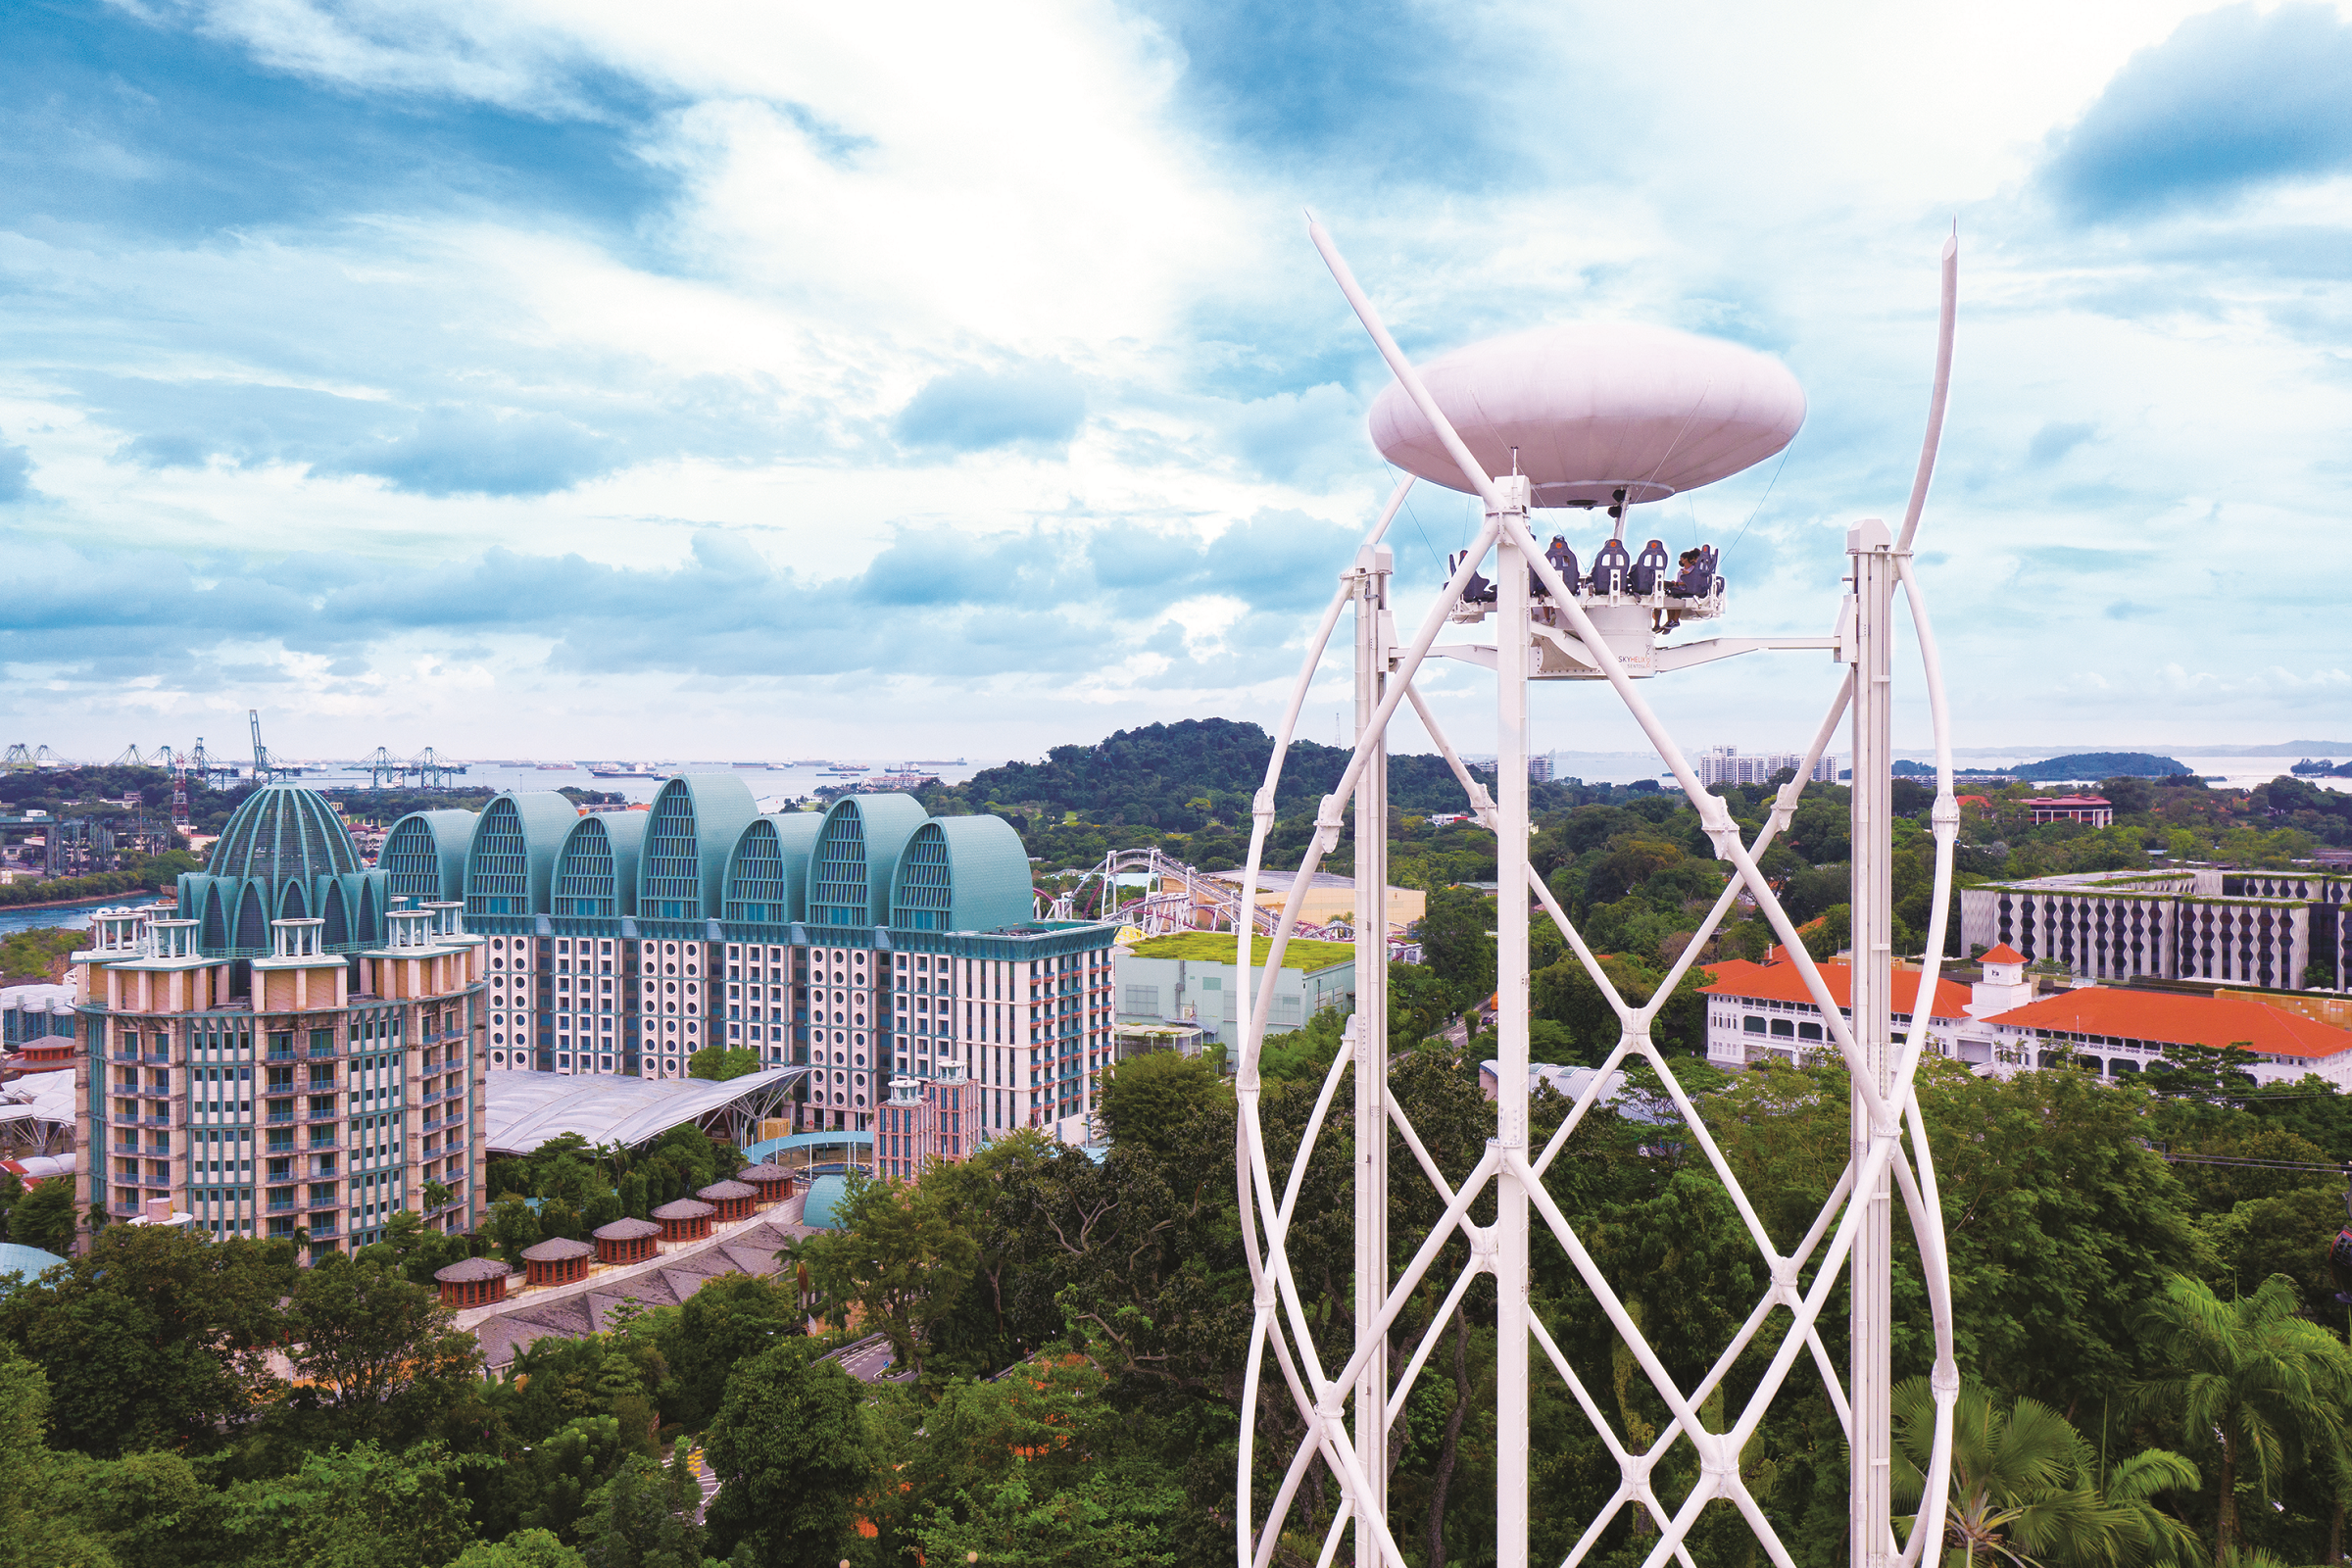 Enjoy a truly moving view on Sentosa’s Skyhelix – which gently rotates 79m above sea level